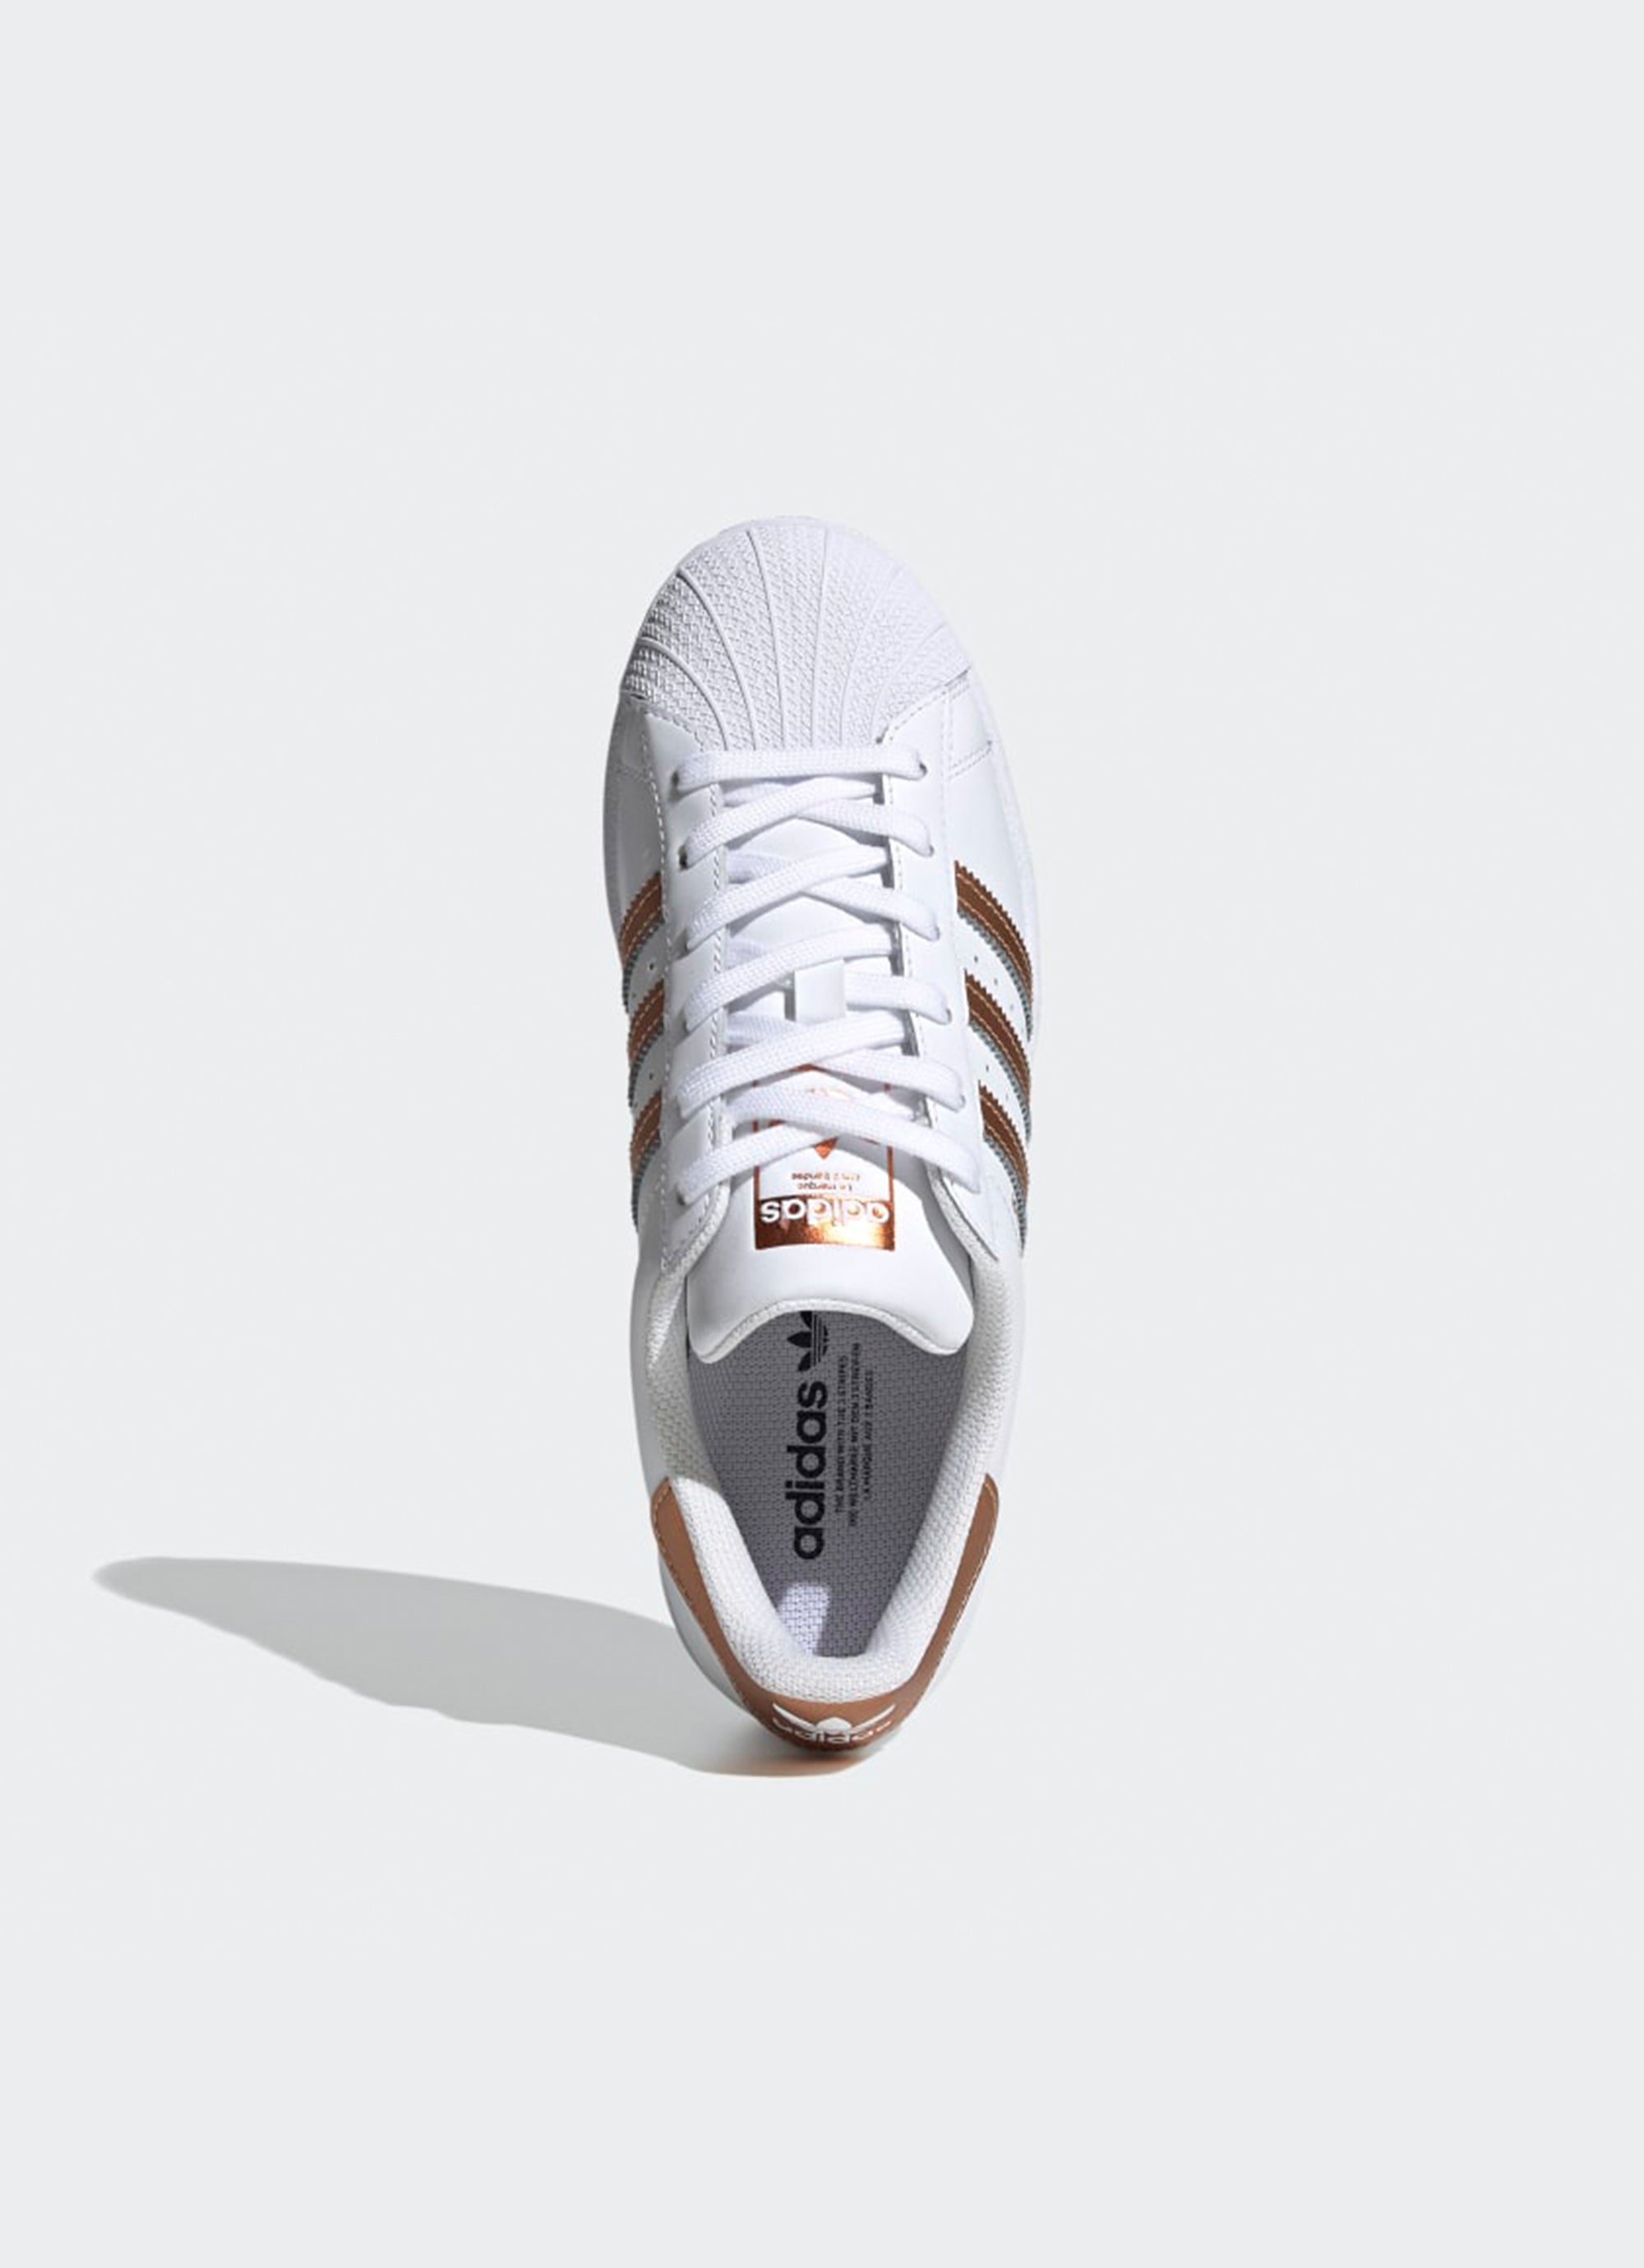 Buy Adidas Women's Leather Ftwwht/Ftwwht/Supcol Superstar Bold W Originals  Shoes - 6- UK at Amazon.in